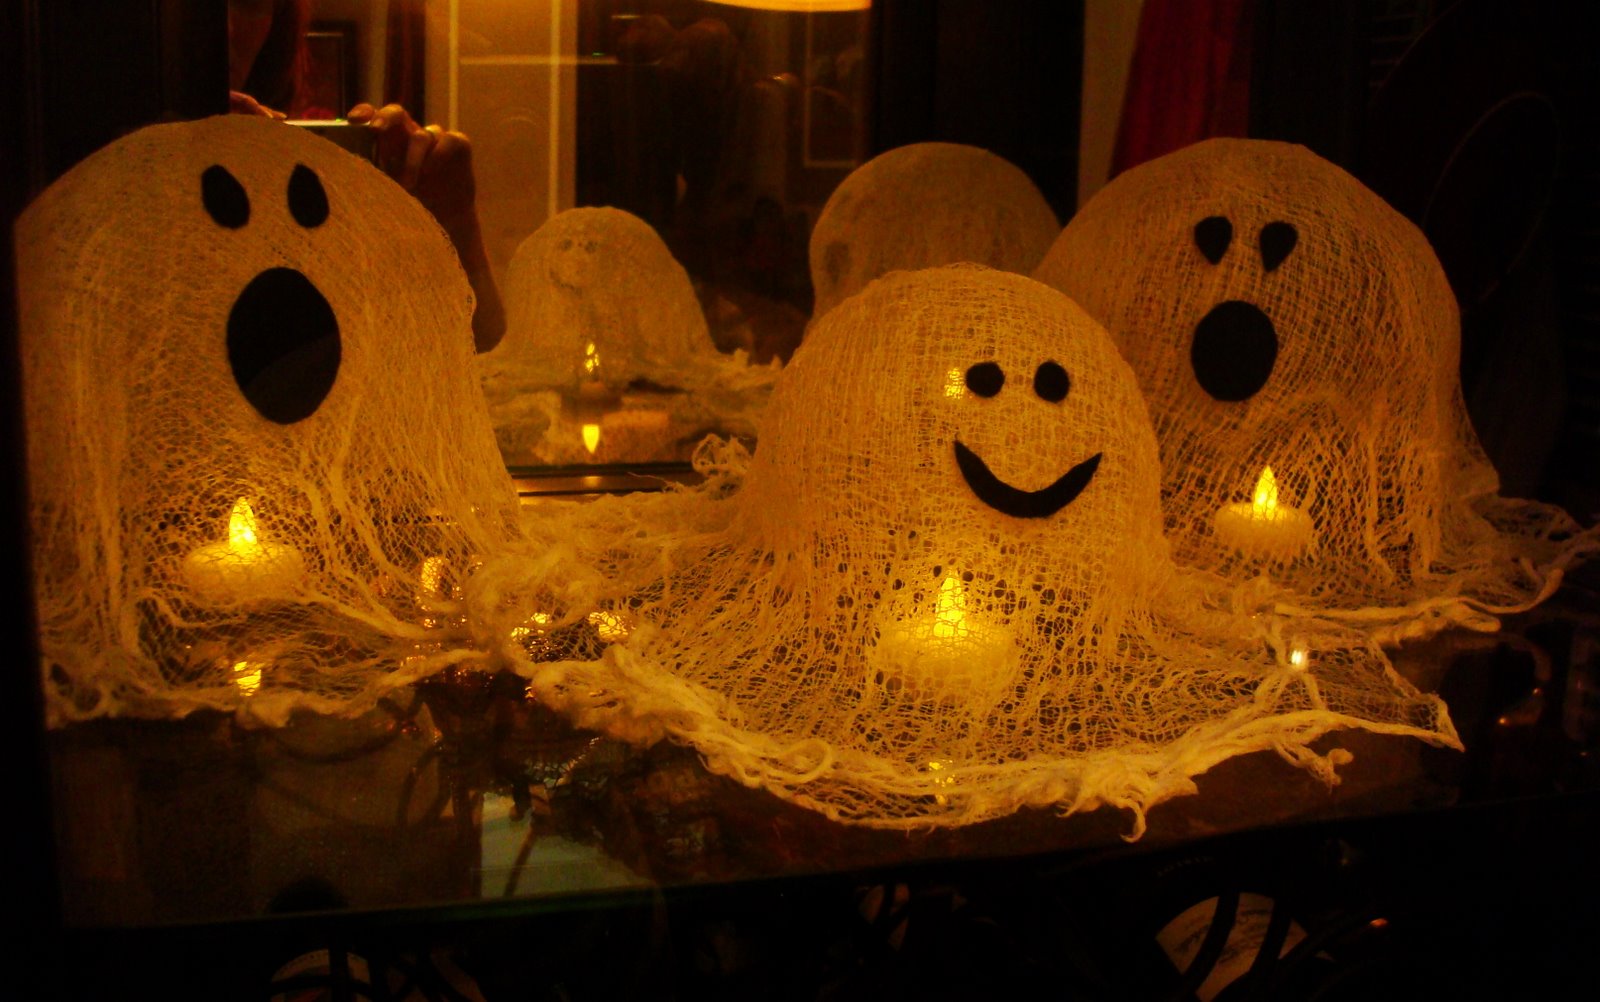 DIY cheesecloth ghosts